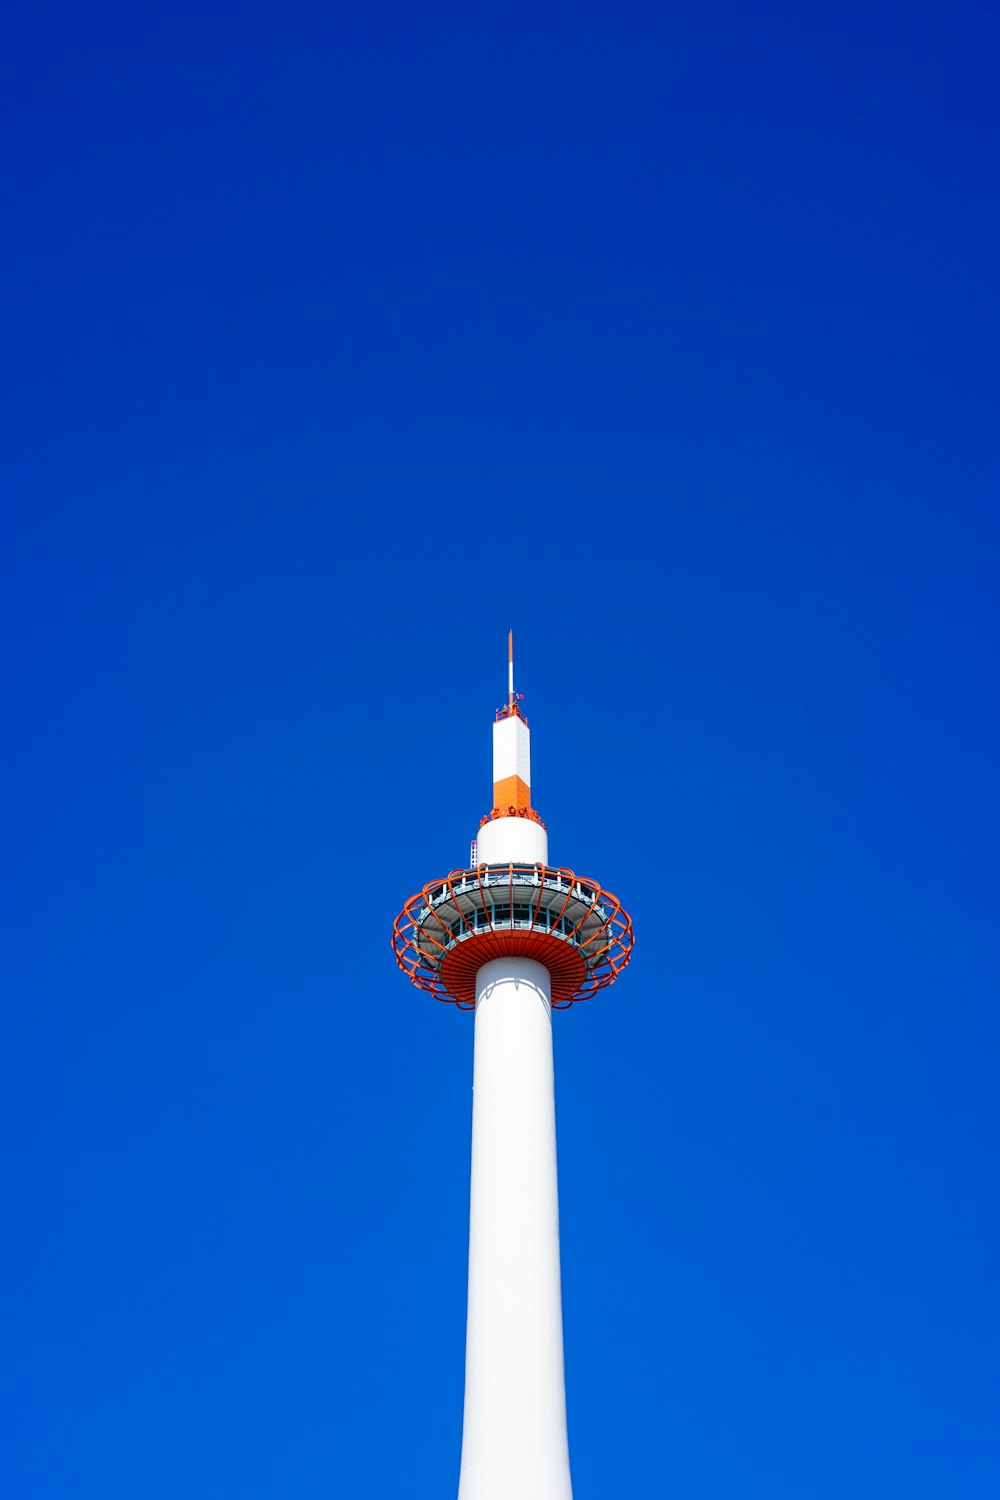 a tall white tower with a red top against a blue sky